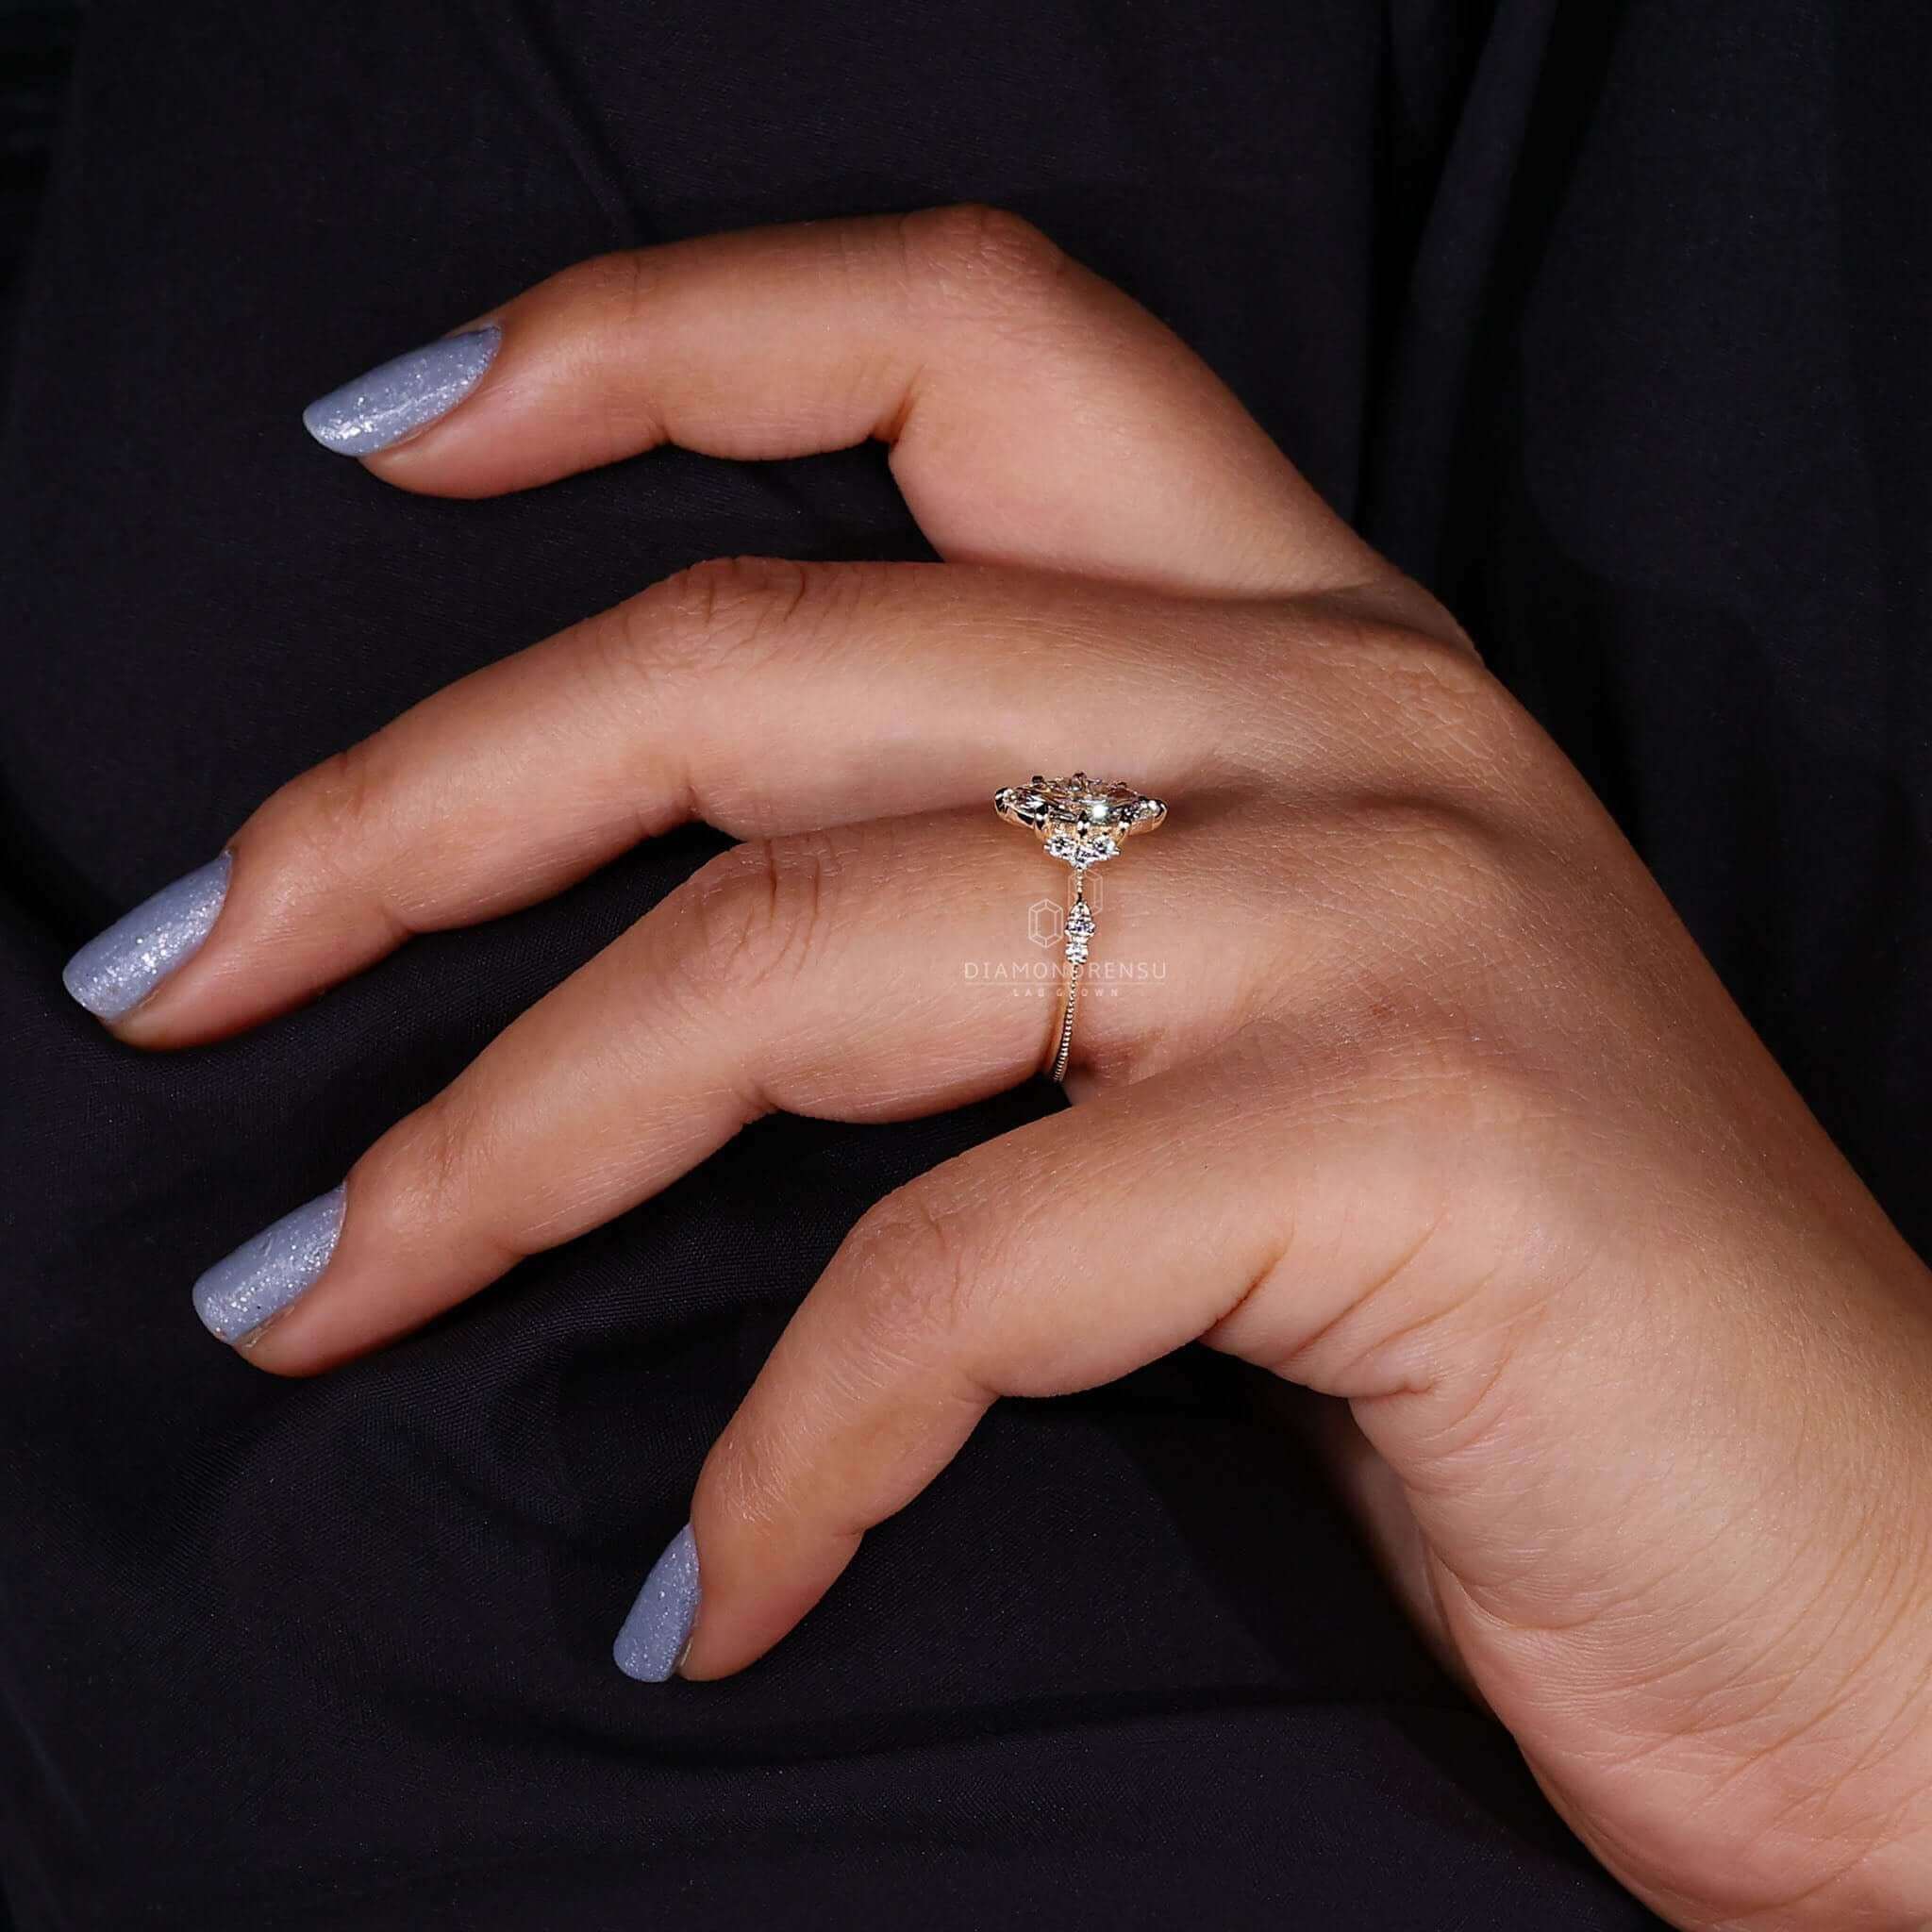 Close-up of a woman’s hand wearing a unique marquise cut ring, featuring a vintage engagement ring design with sidestones and claw prongs.